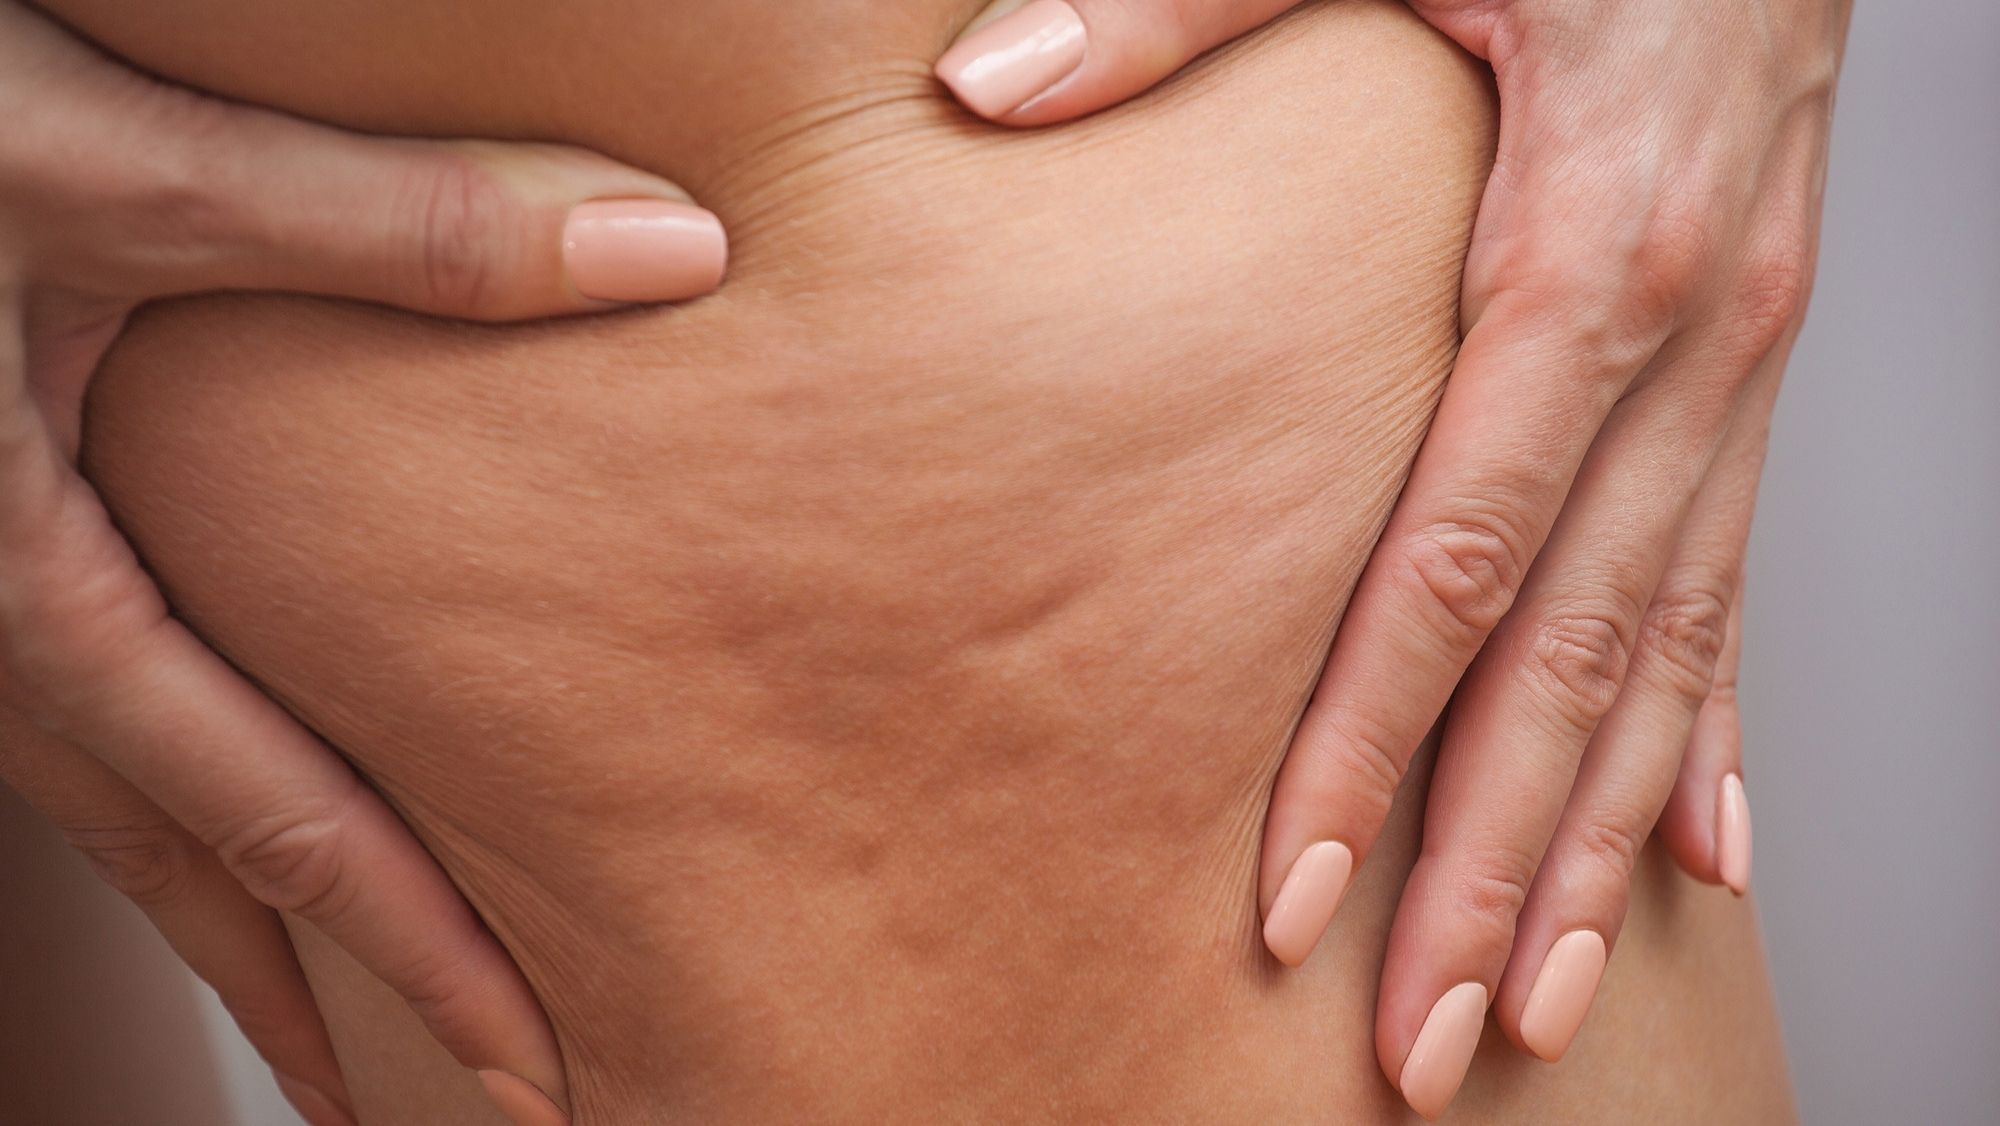 How to Choose Cellulite Treatments That Work for You